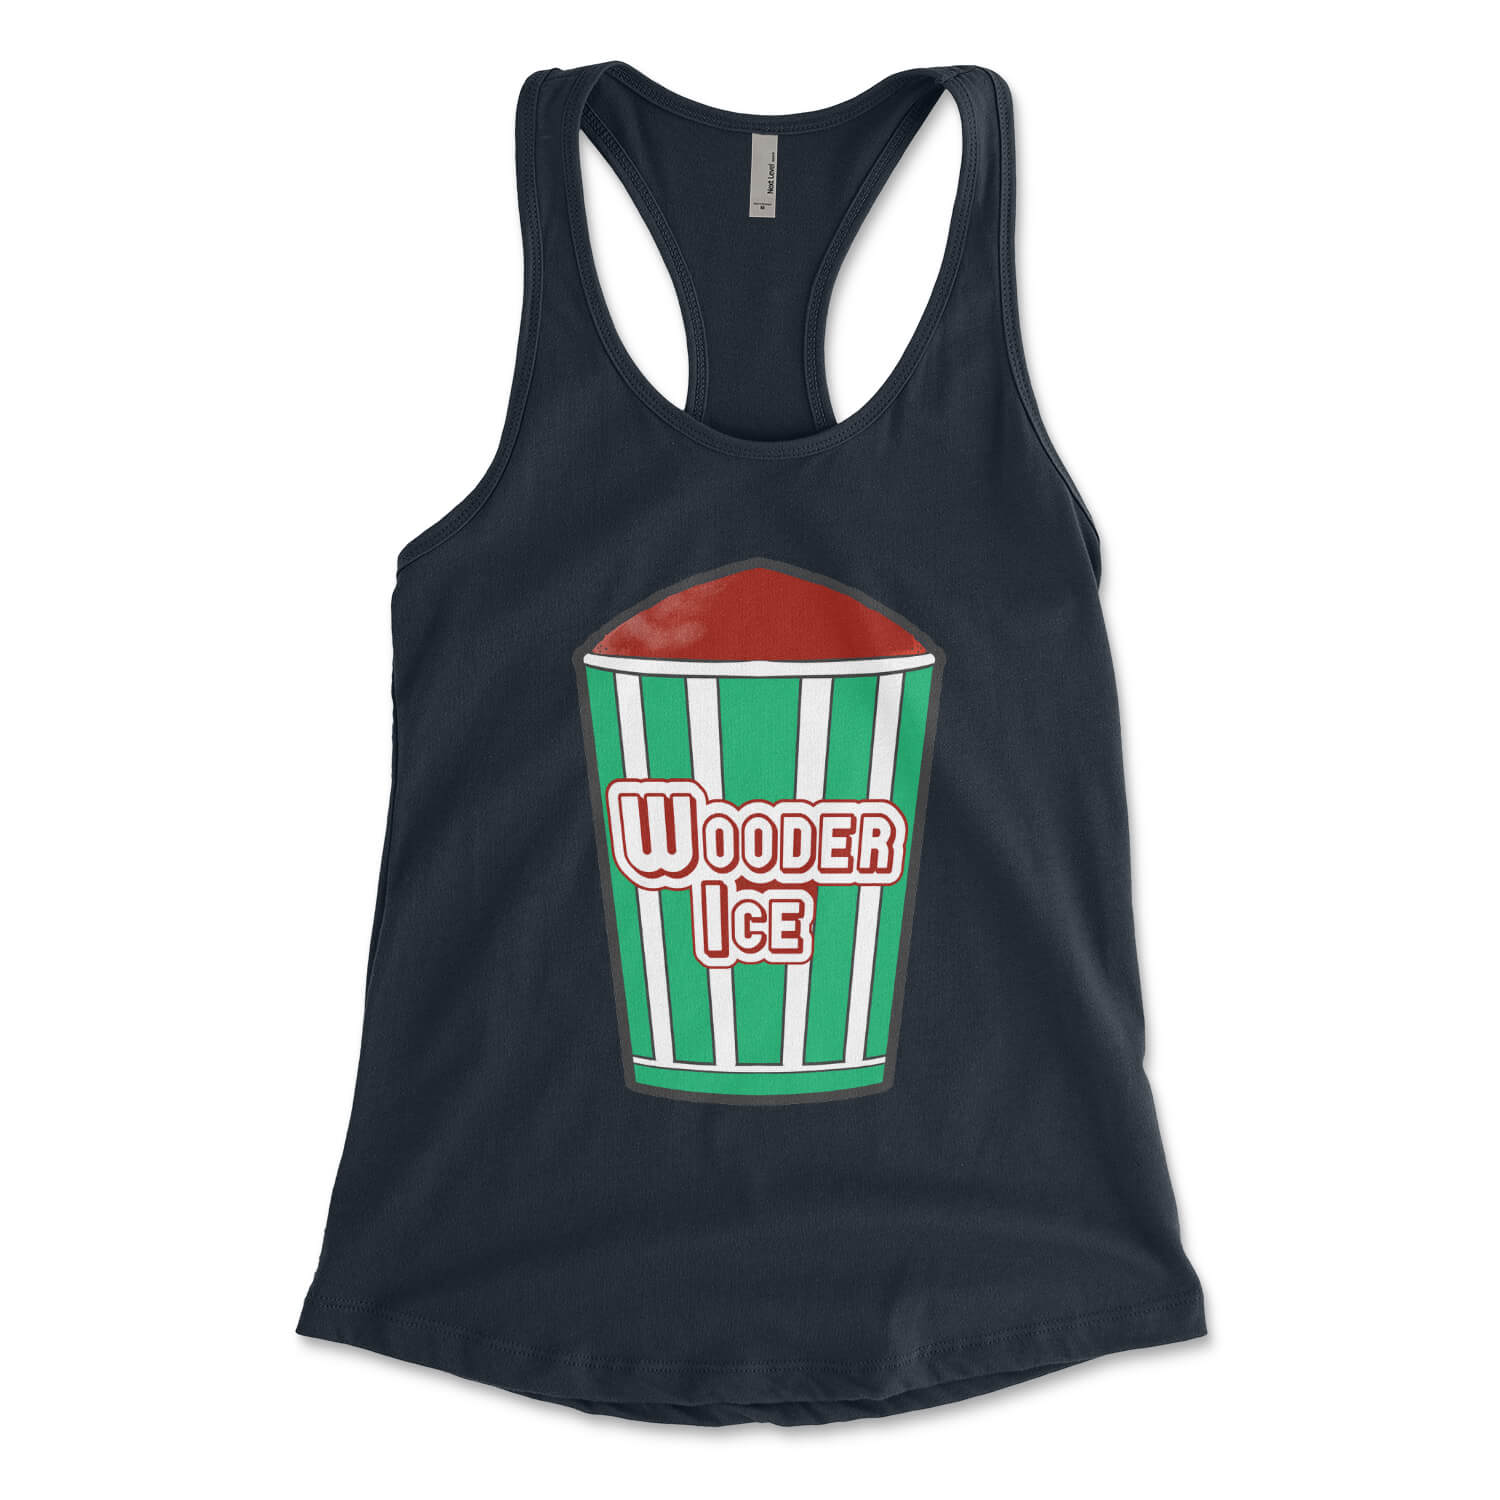 Philadelphia Philly water ice wooder ice midnight navy blue womens racerback tank top from Phillygoat